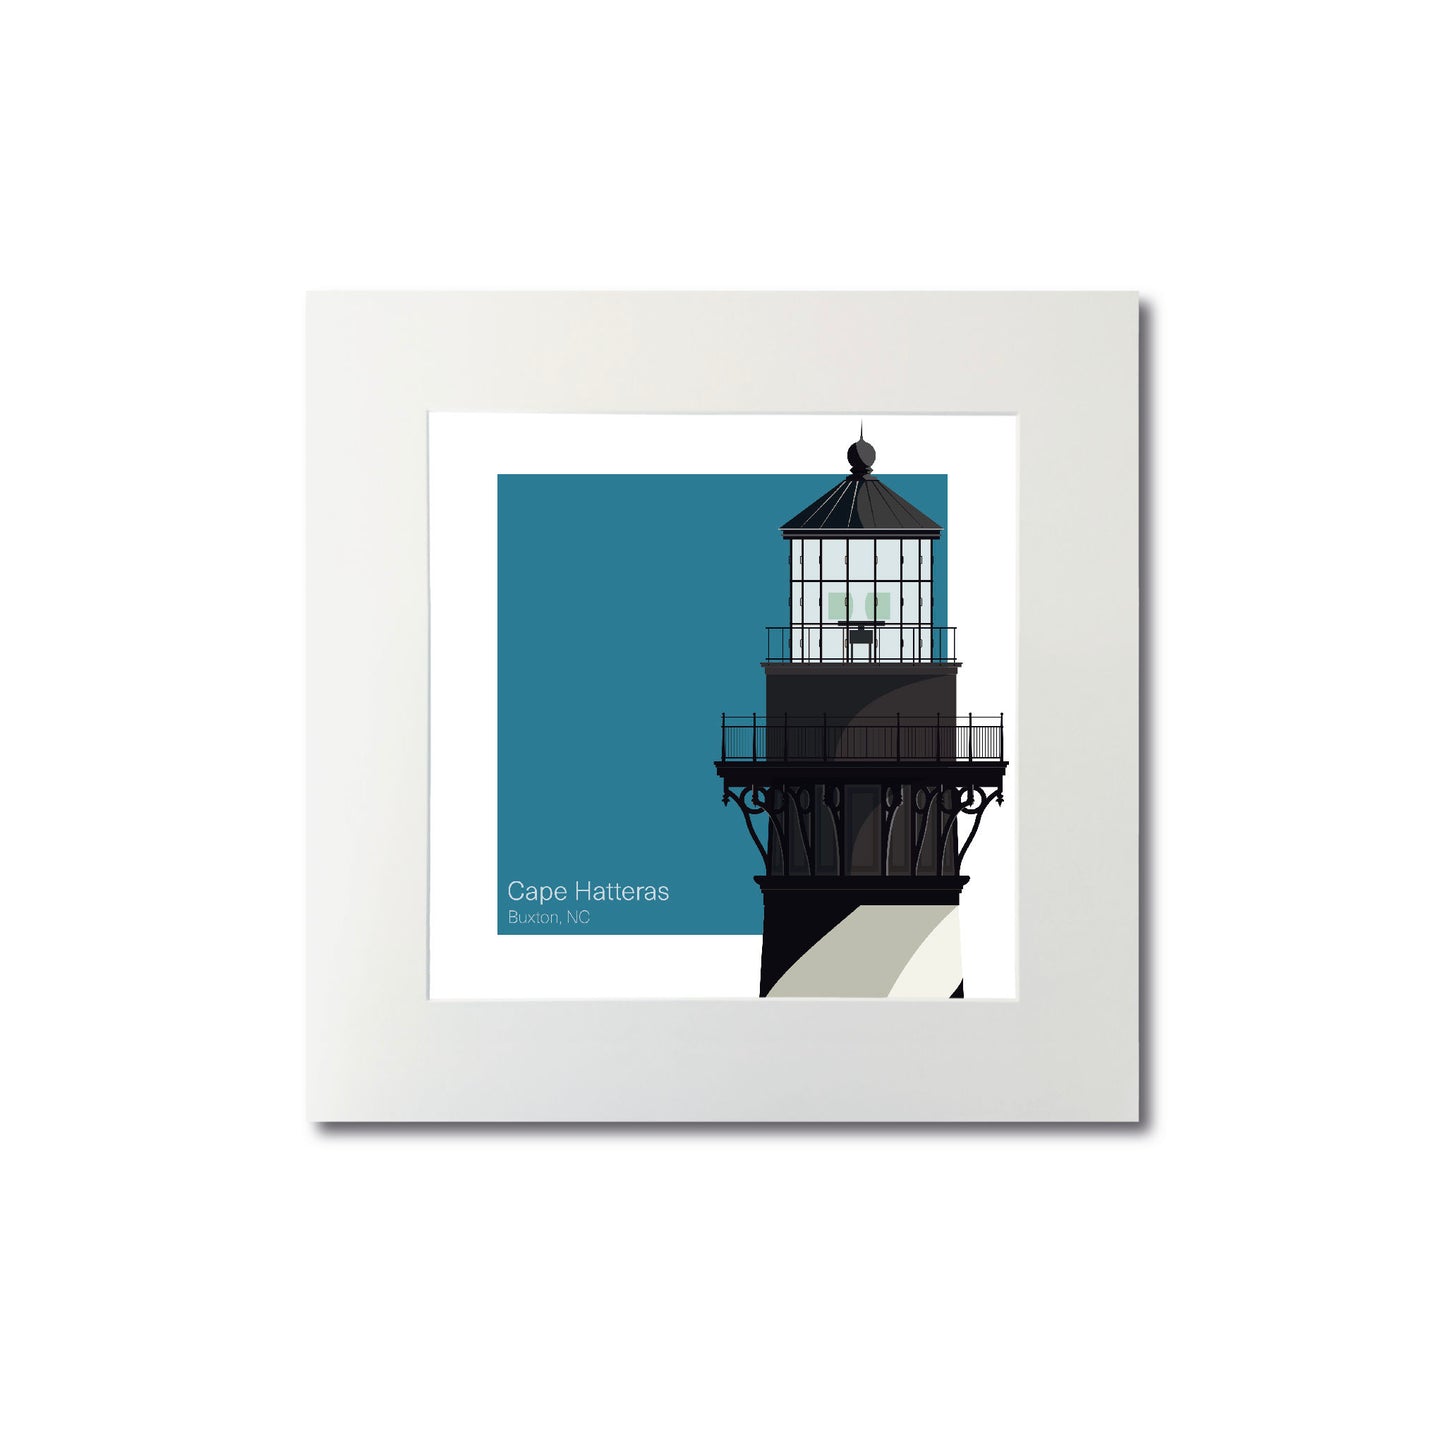 Illustration of the Cape Hatteras lighthouse, NC, USA. On a white background with aqua blue square as a backdrop., mounted and measuring 12"x12" (30x30cm).